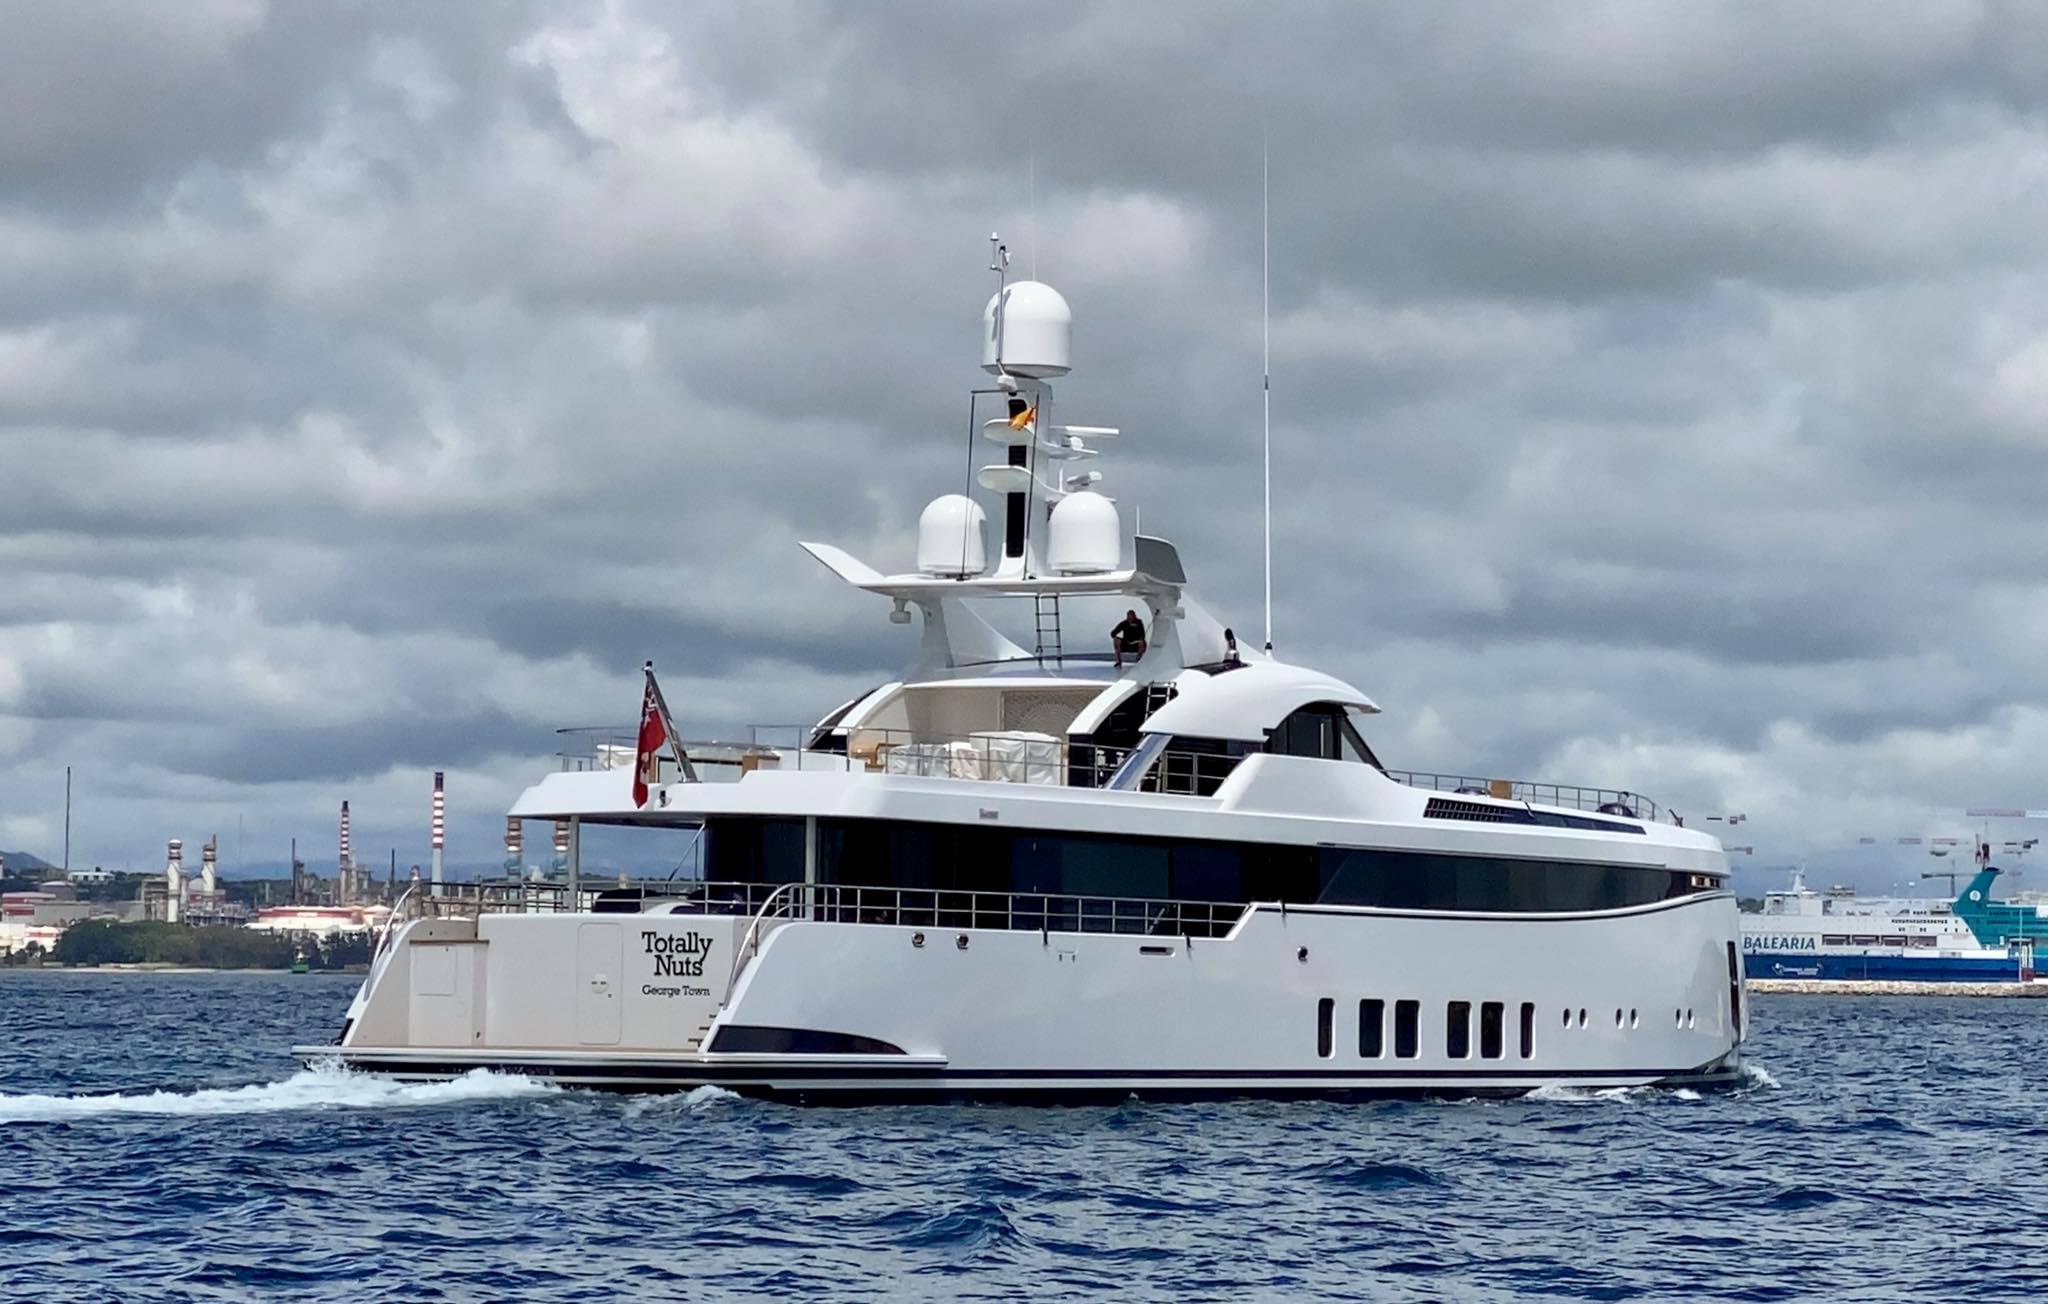 The fast superyacht Totally Nuts in Gibraltar